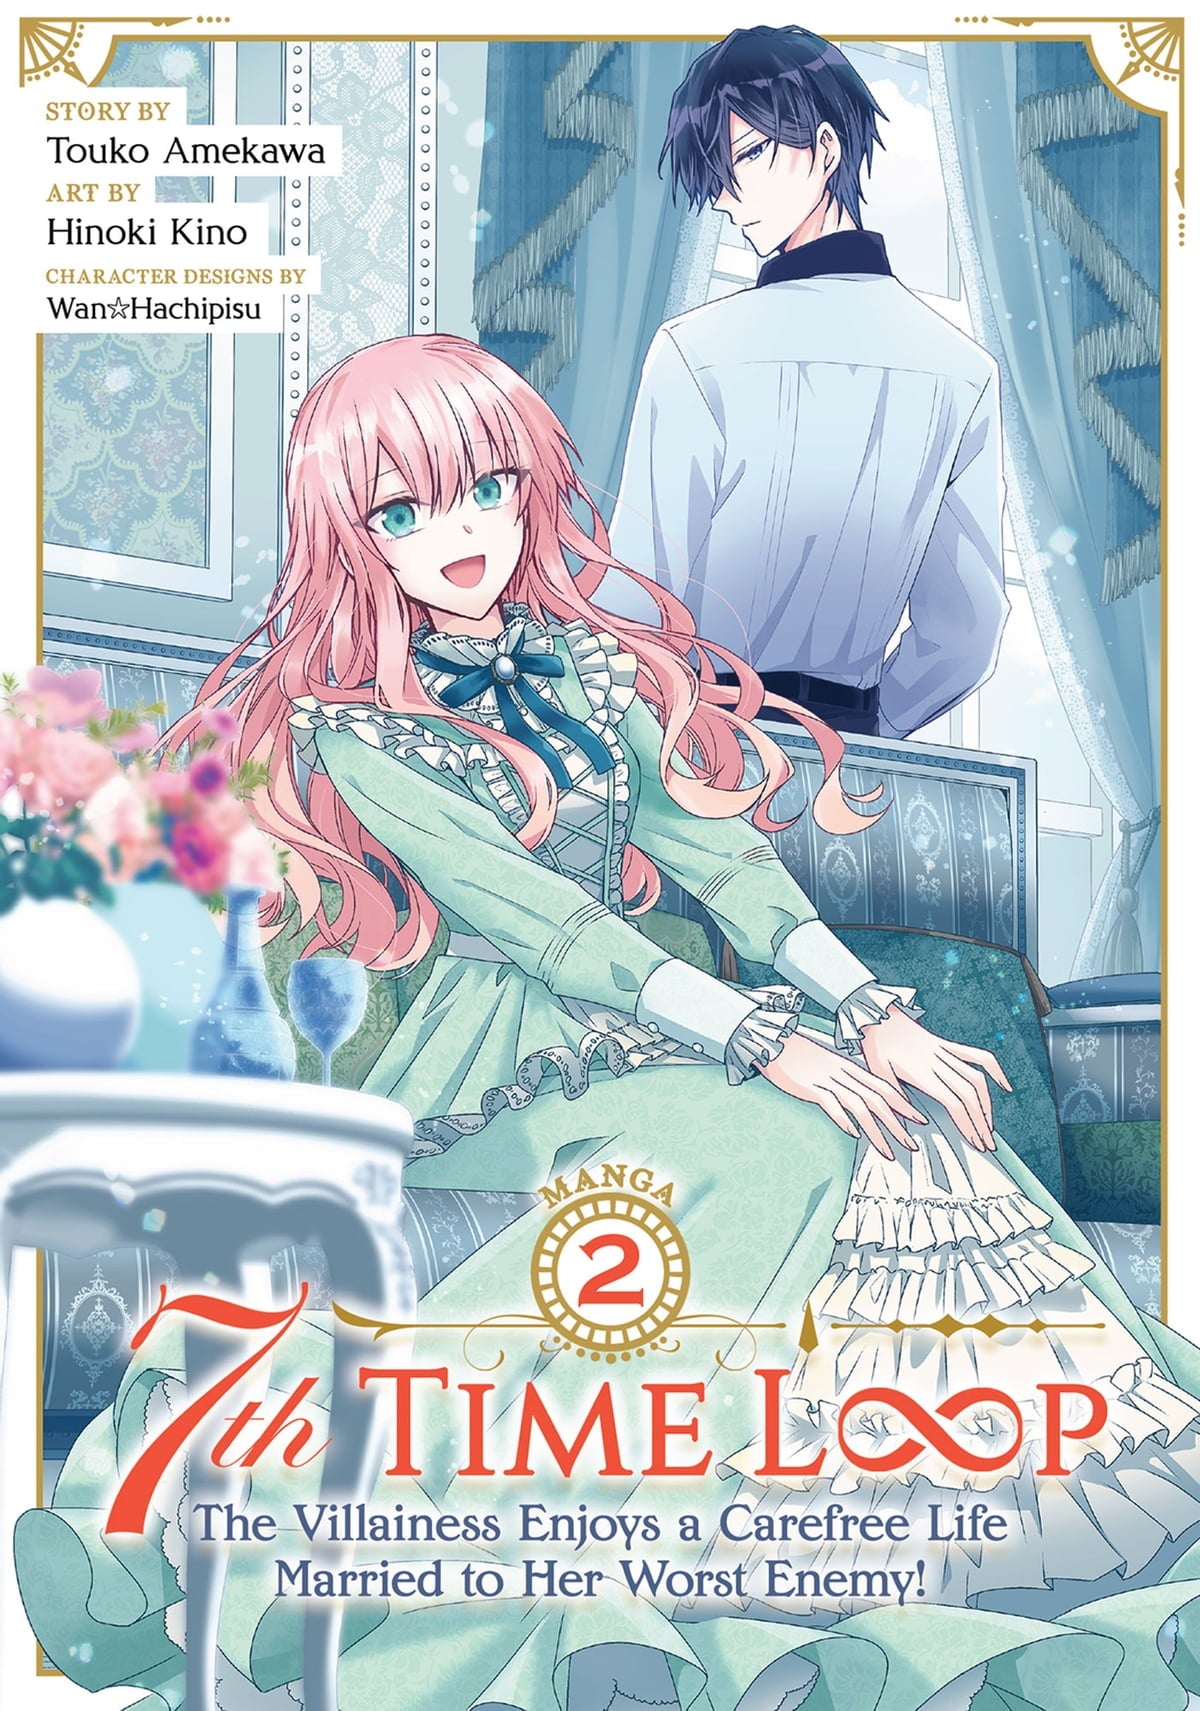 7th Time Loop The Villainess Enjoys a Carefree Life Married to Her Worst Enemy! (Manga) - Vol. 2